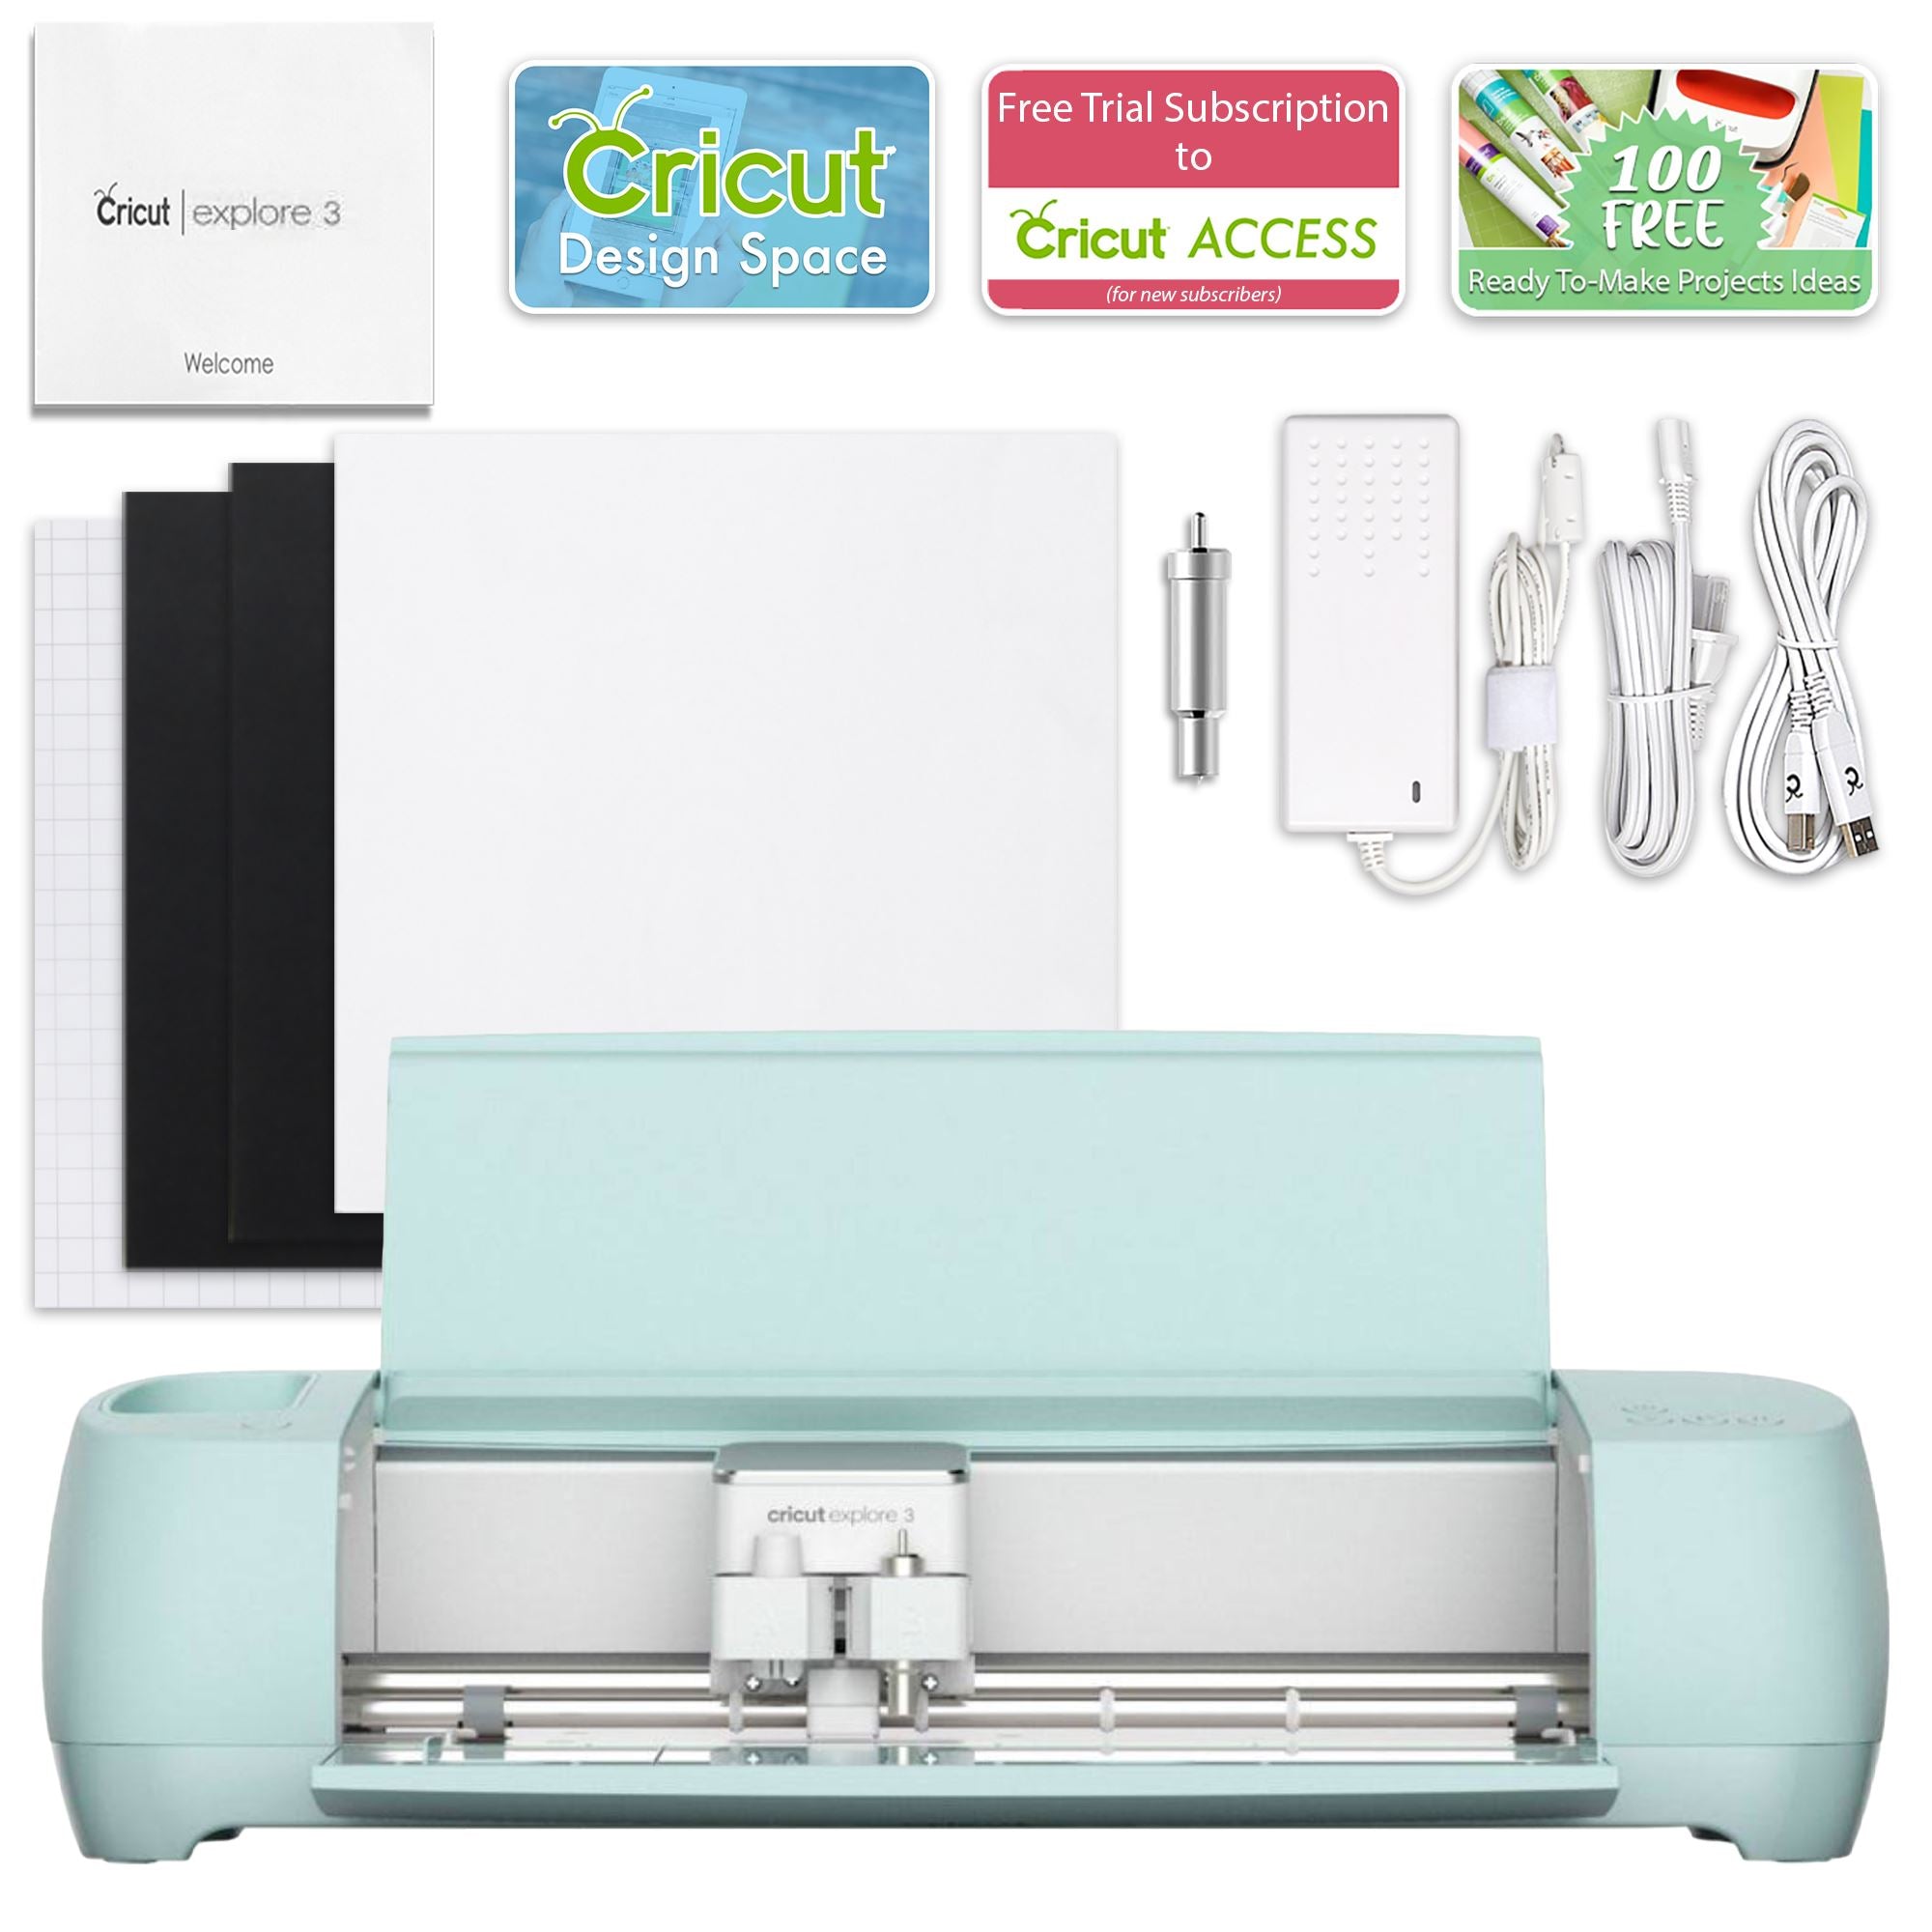 Upgrade your crafting/DIY kit with up to $200 off Cricut gear